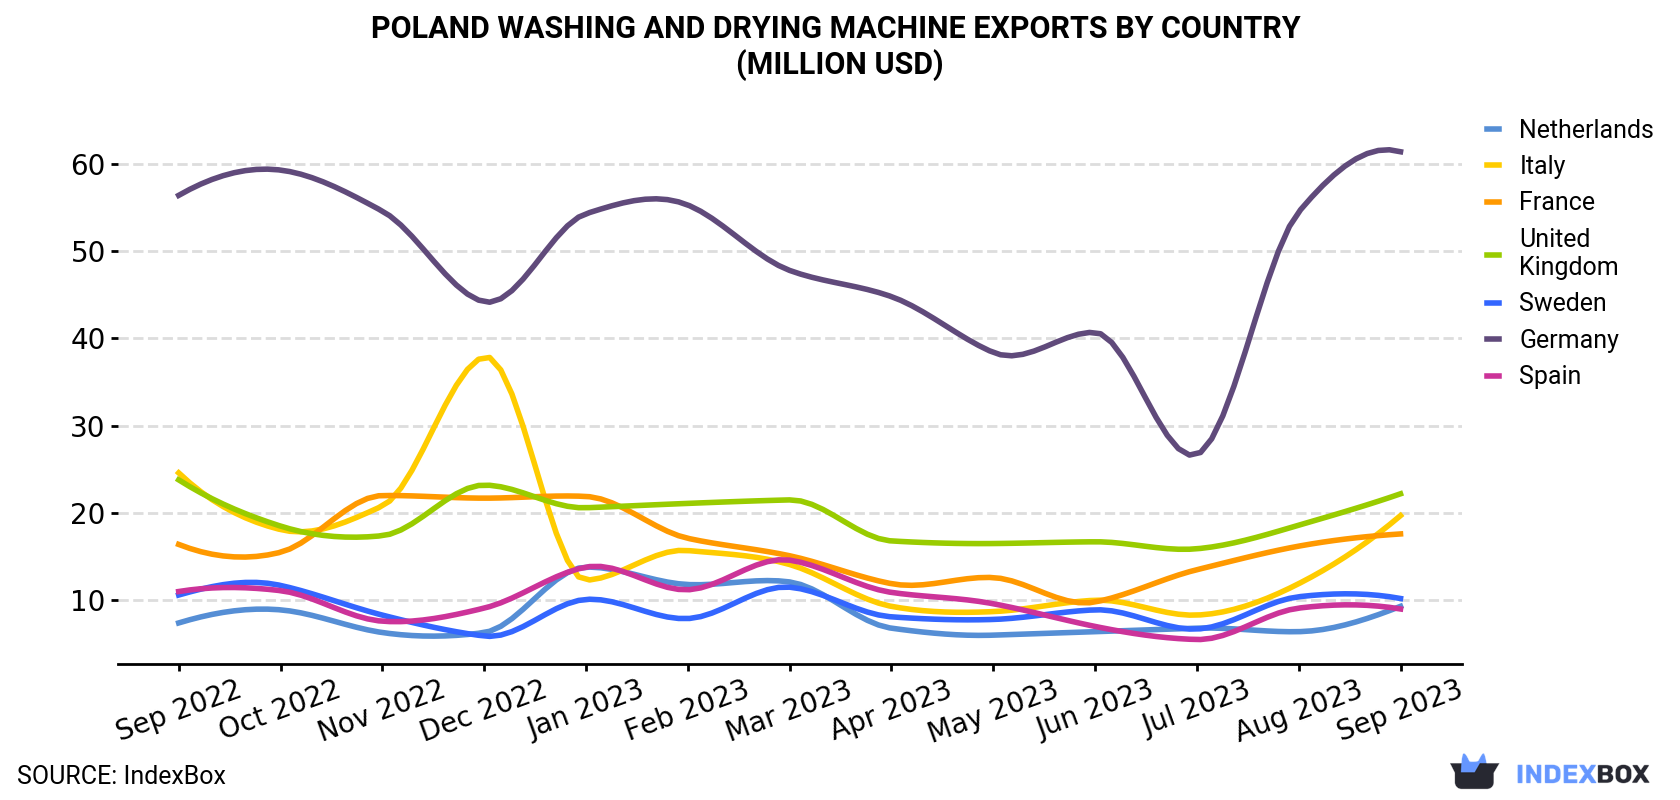 Poland Washing and Drying Machine Exports By Country (Million USD)